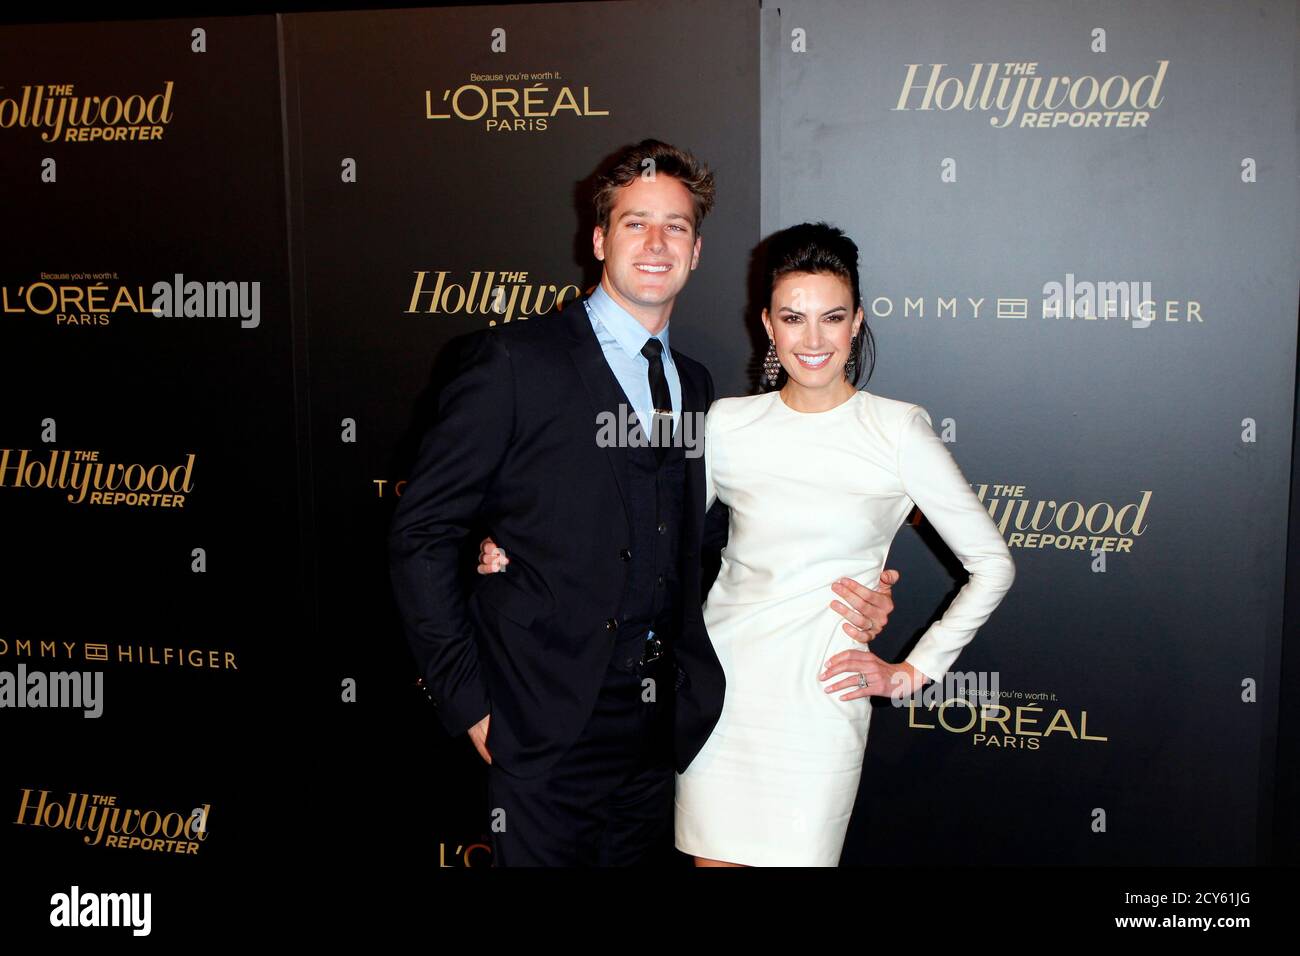 Actor Armie Hammer arrives with Elizabeth Chambers at the The Hollywood  Reporter Academy Awards nominee party in Los Angeles February 24, 2011.  REUTERS/Lucas Jackson (UNITED STATES - Tags: ENTERTAINMENT Stock Photo -  Alamy